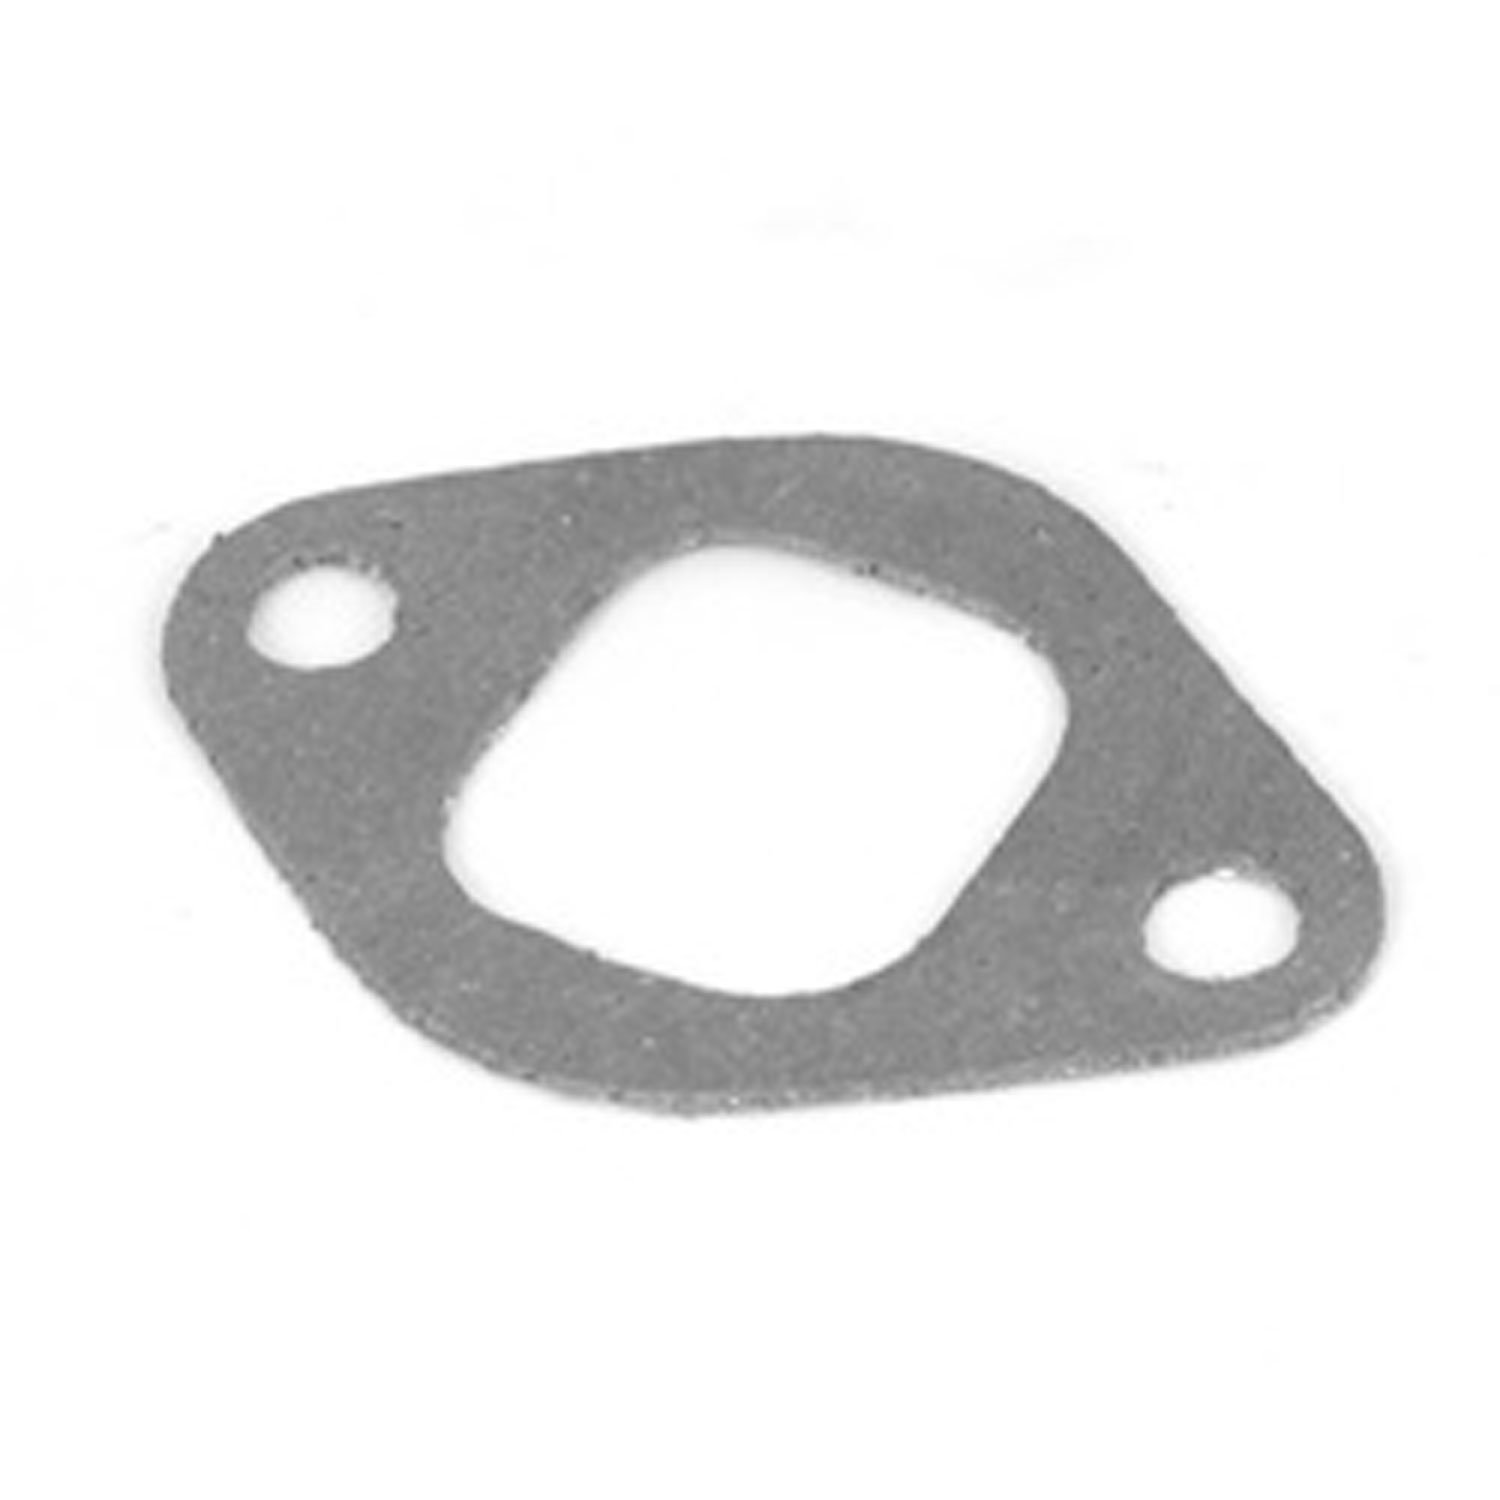 This replacement carburetor gasket from Omix-ADA fits between the carburetor and intake manifold on